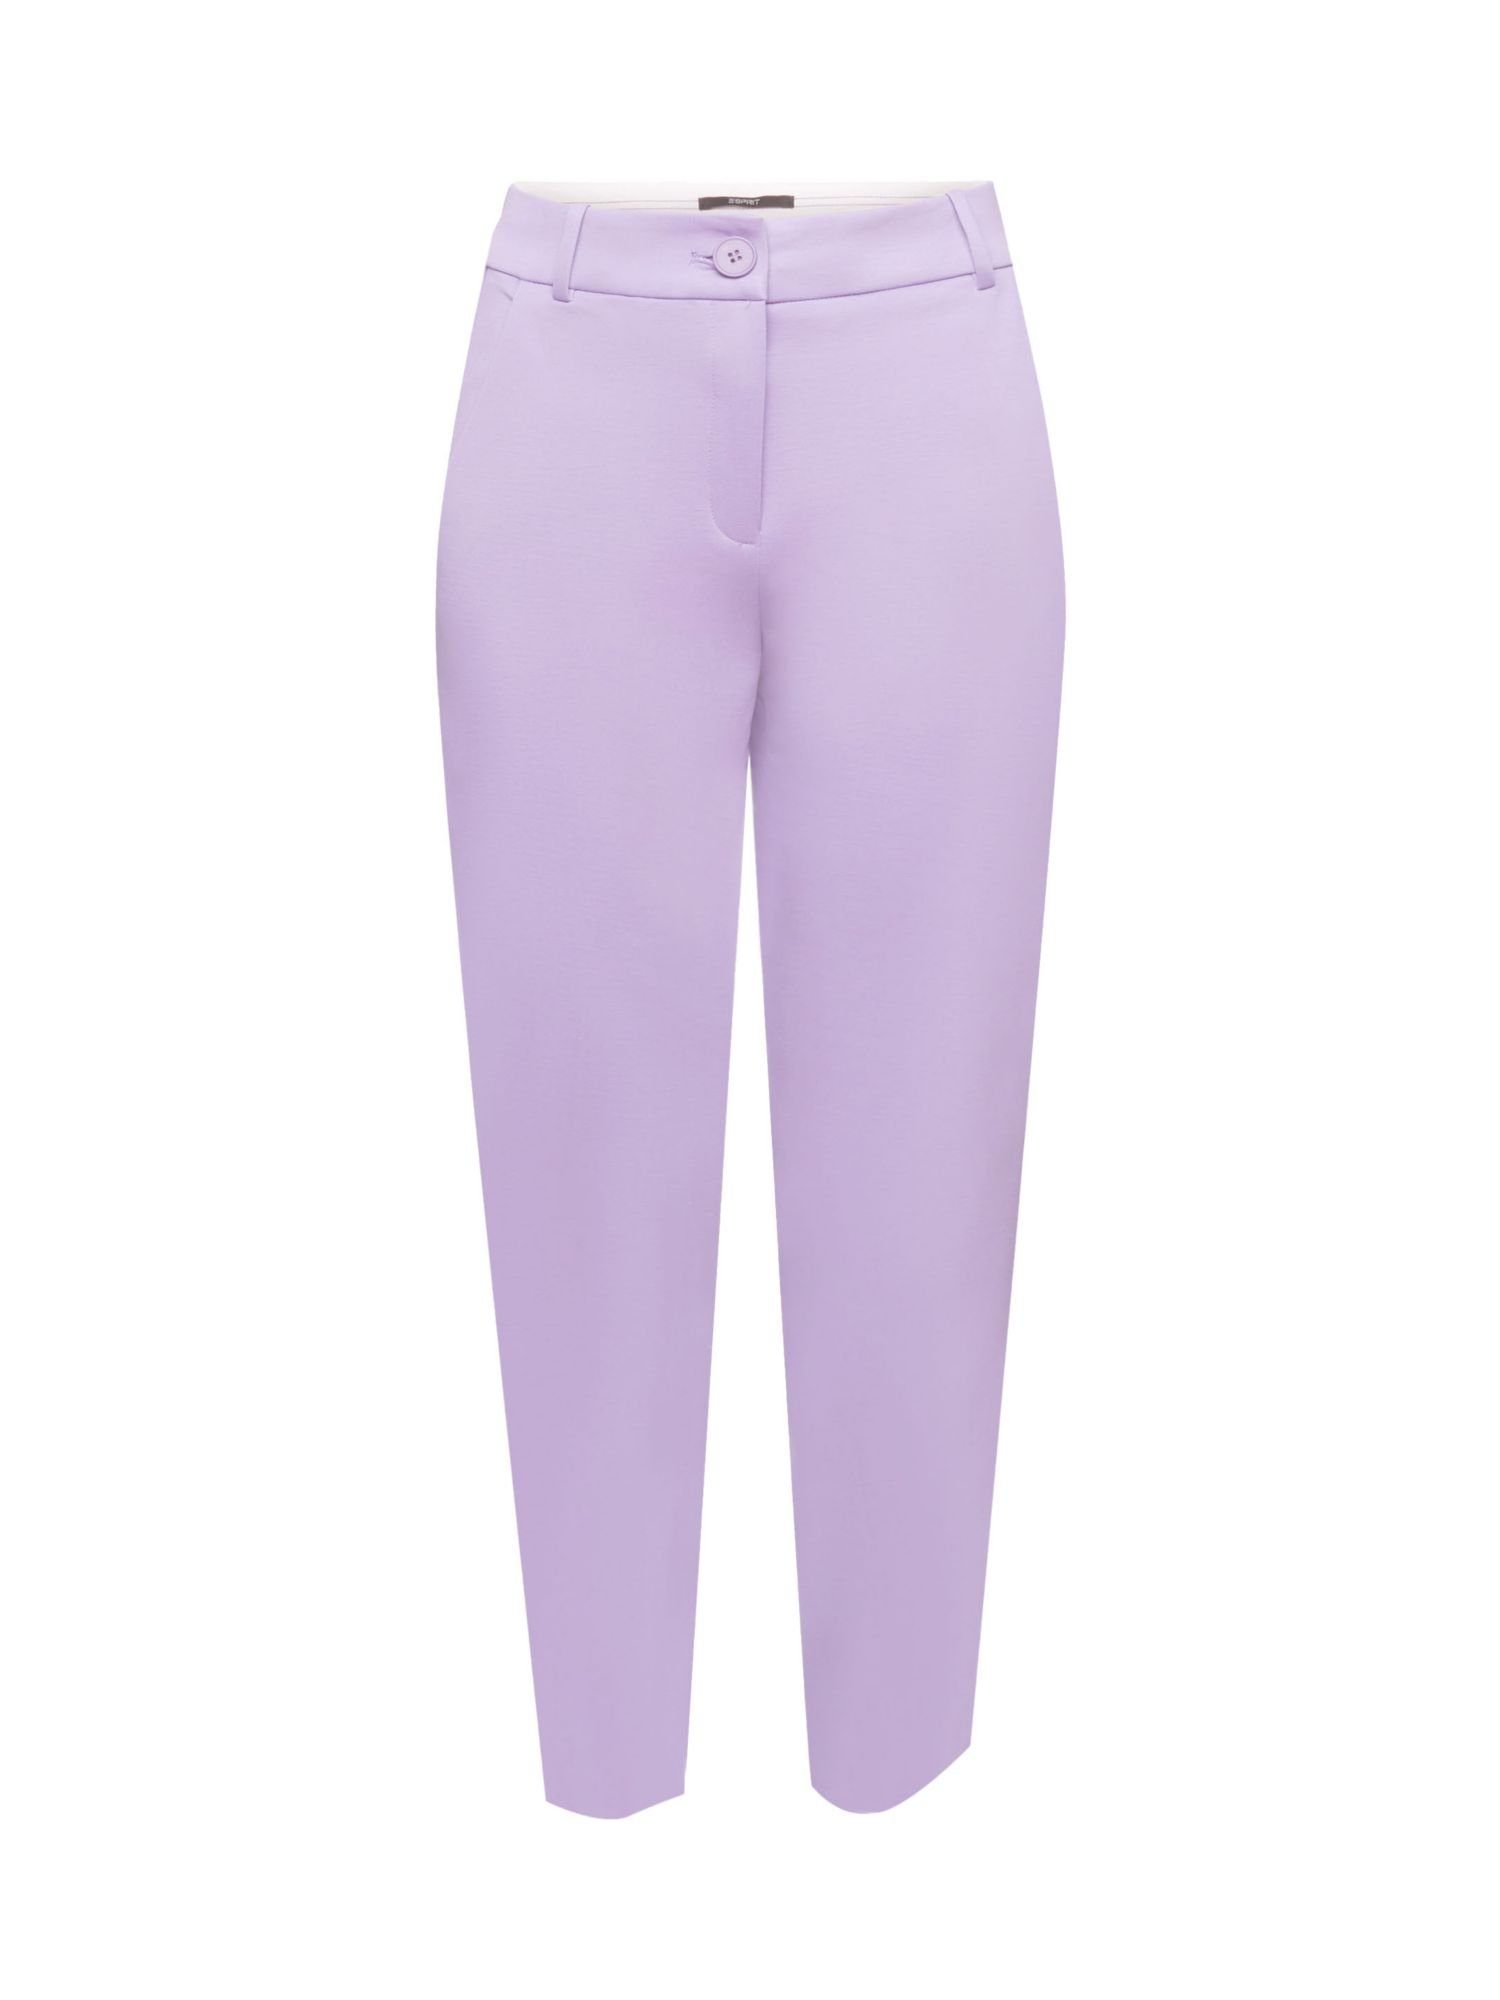 PUNTO LAVENDER Match SPORTY Tapered Collection Mix Esprit Pants Stretch-Hose &